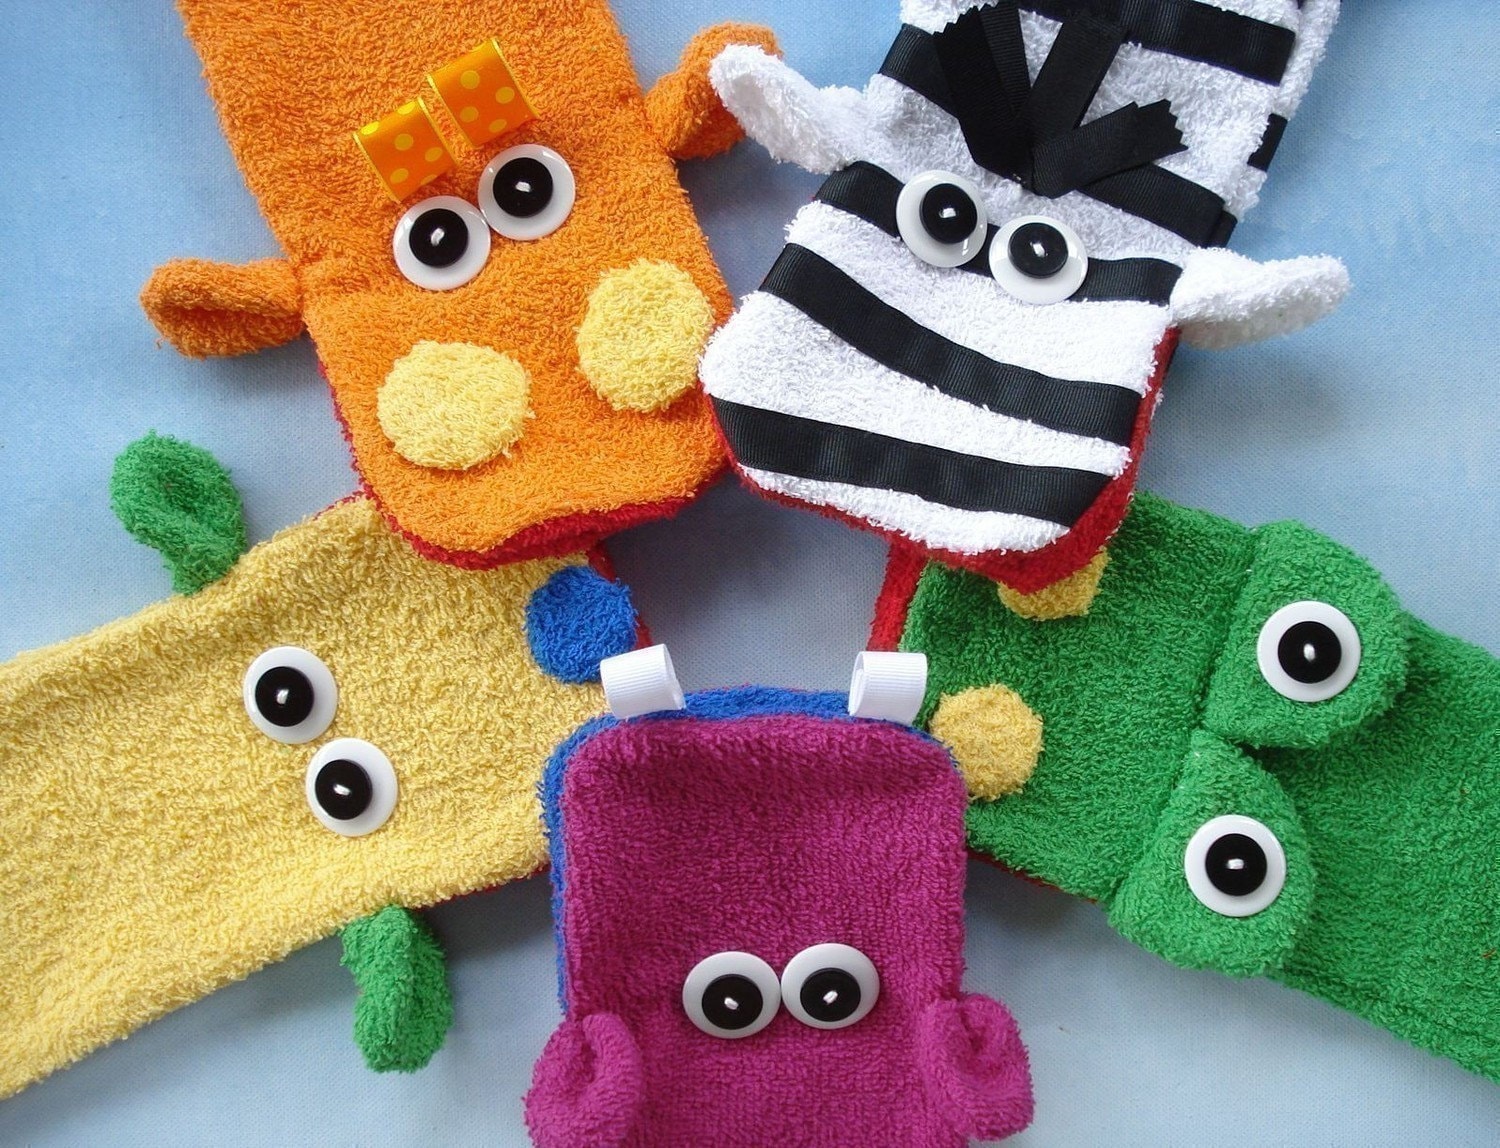 PDF Pattern Garten of ban ban Nab Nab felt sewing stuffed toy. Easy DIY  hand sewing toy pattern and tutorial. Great gift for kids.